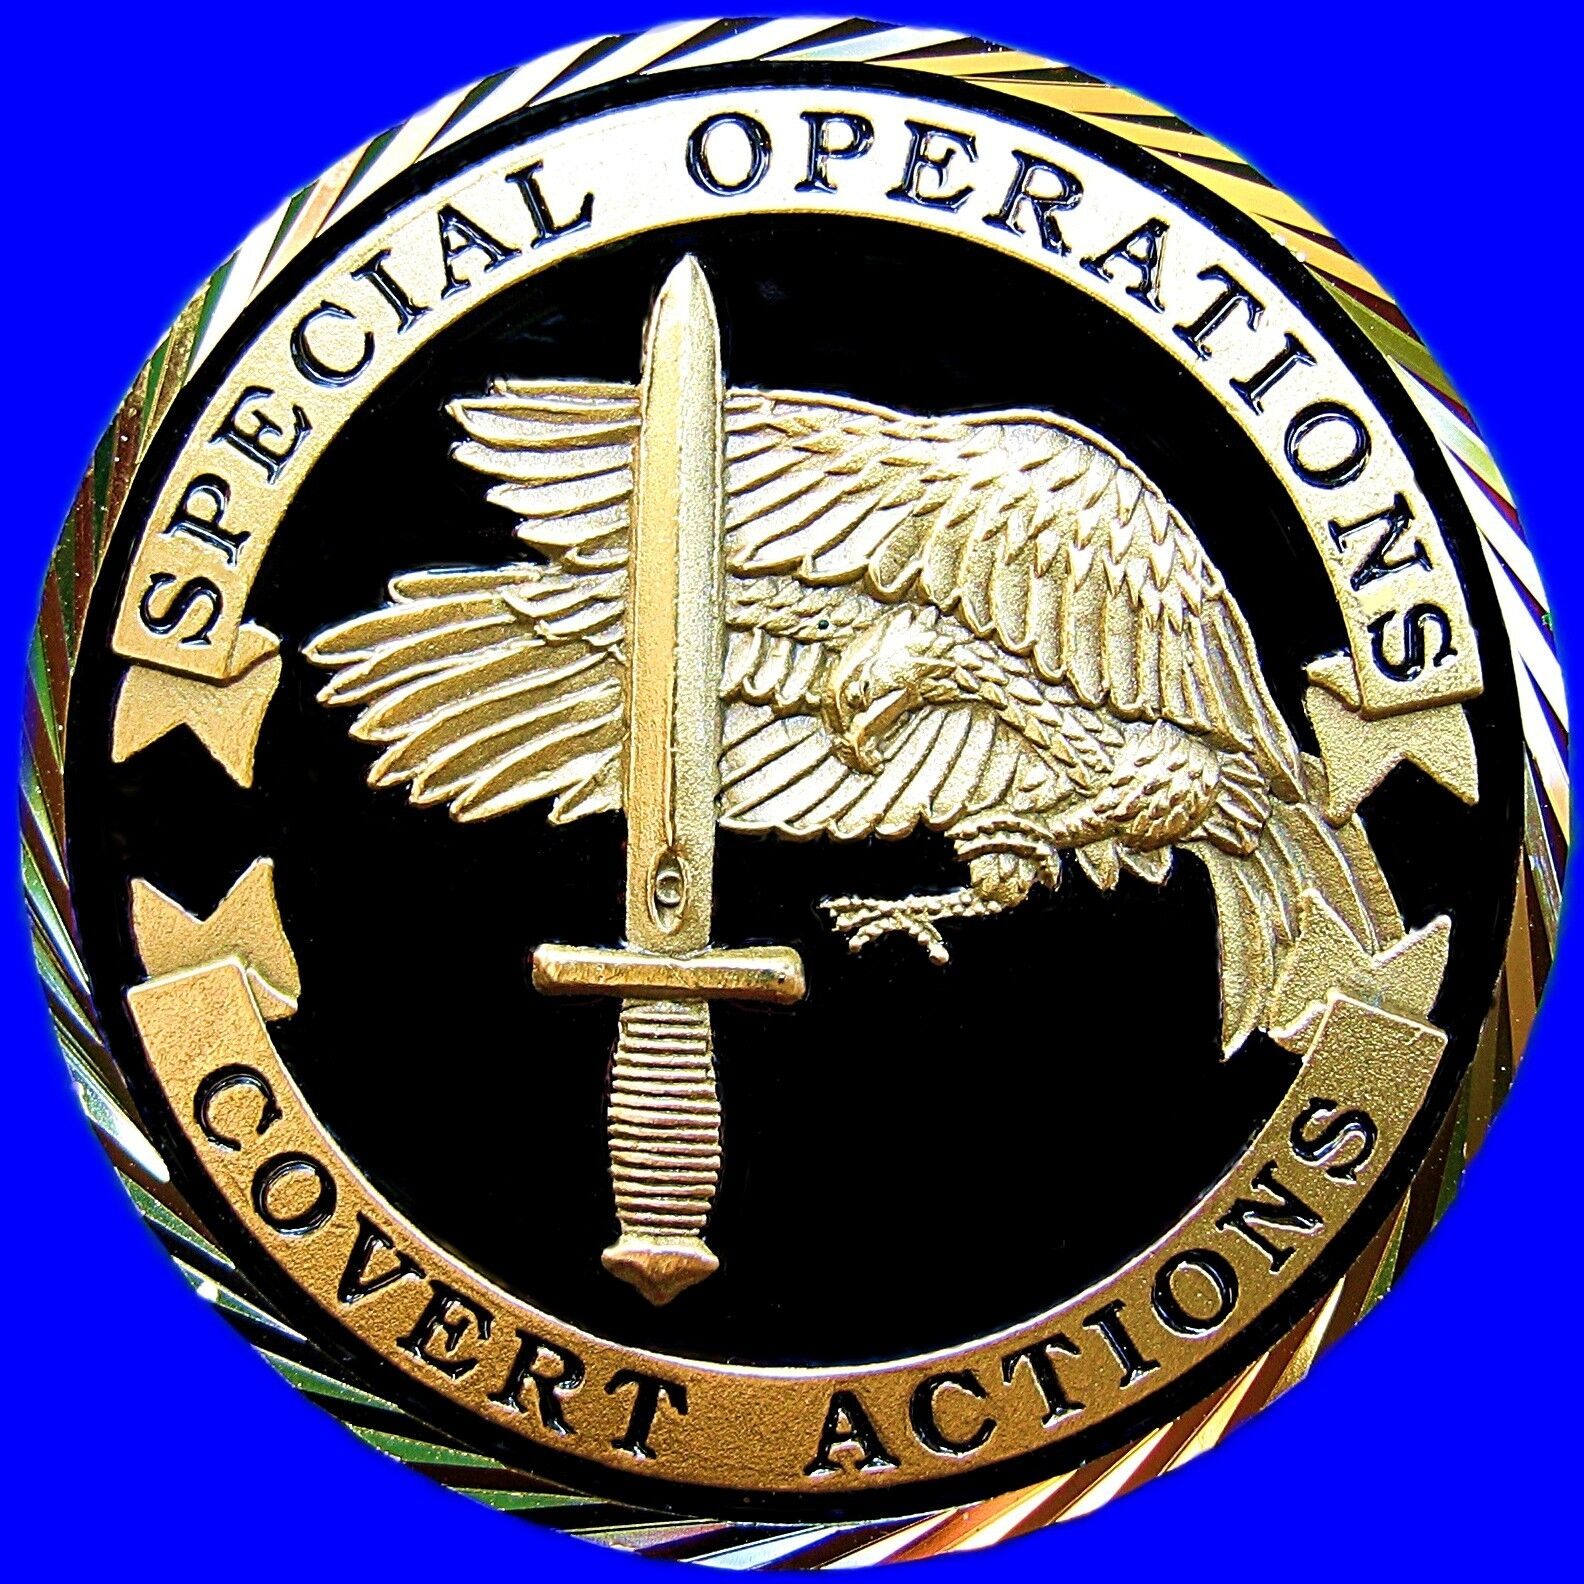 CIA SPECIAL OPERATIONS COMMANDO BLACK OPS CHALLENGE COIN INTELLIGENCE AGENCY 